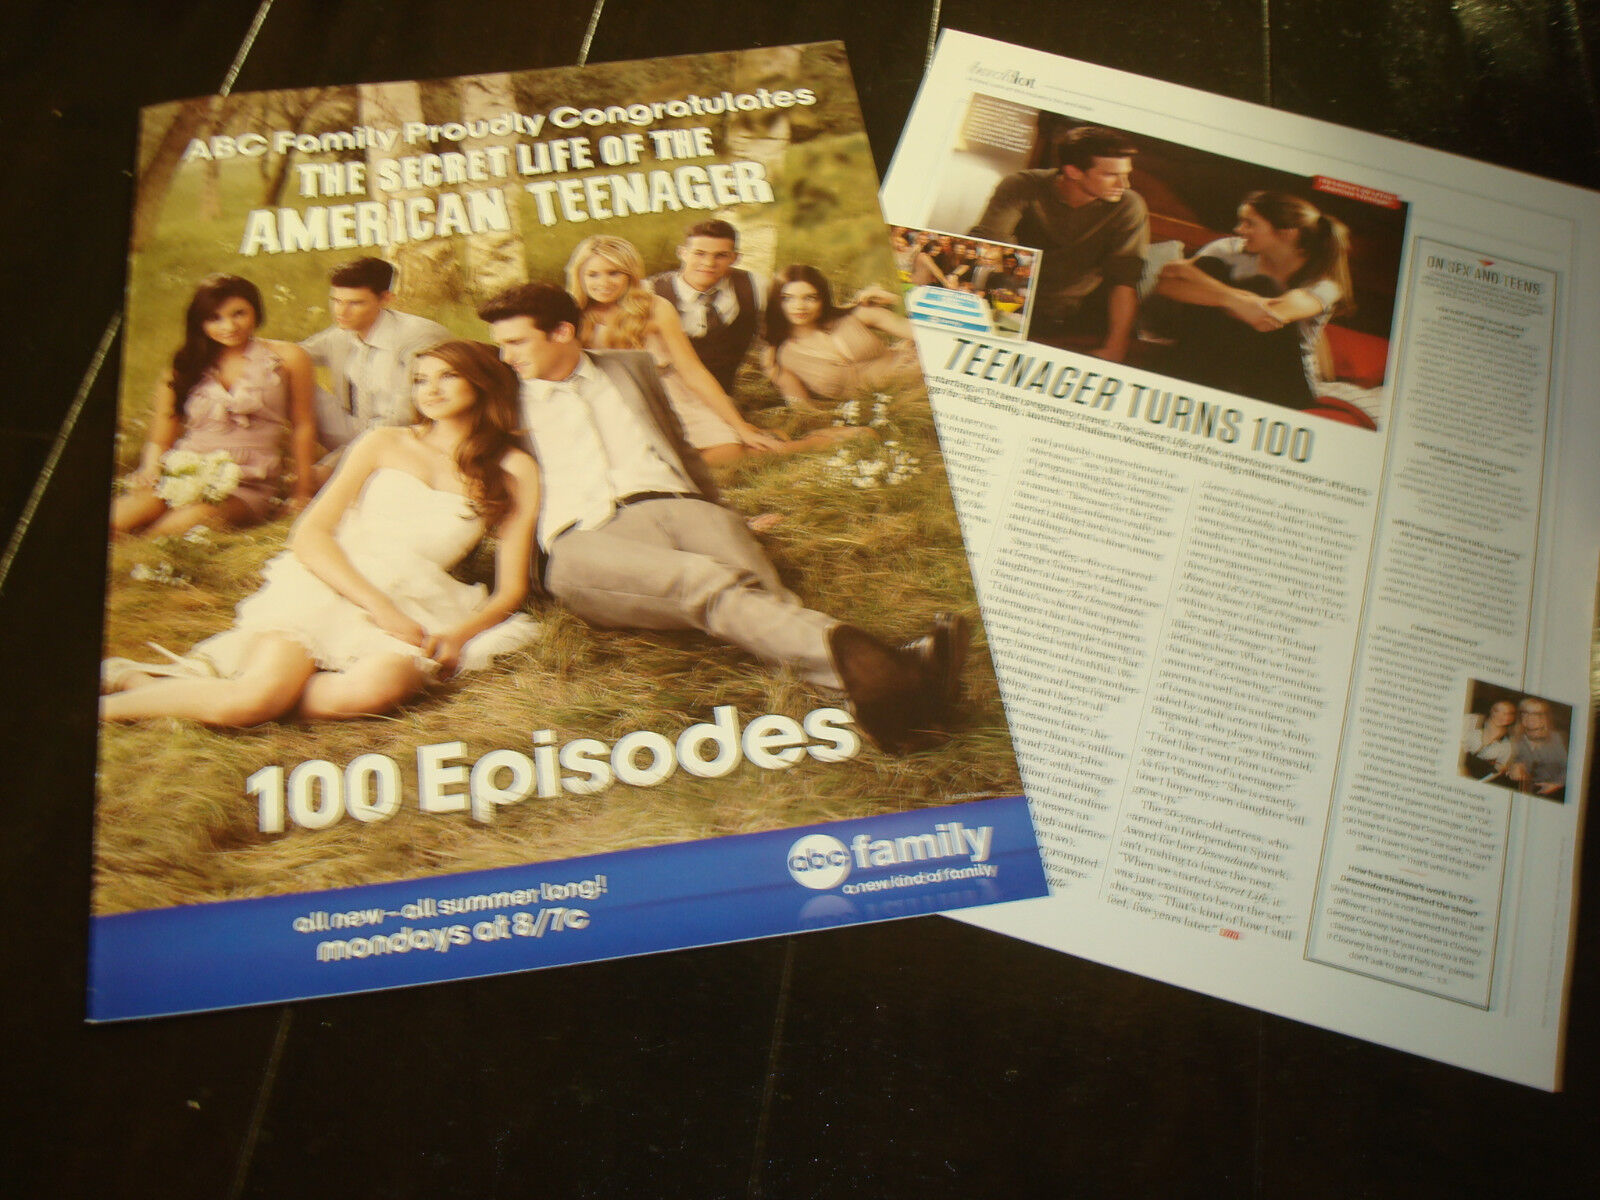 THE SECRET LIFE OF THE AMERICAN TEENAGER 100th eps ad article, Shailene Woodley eBay picture pic